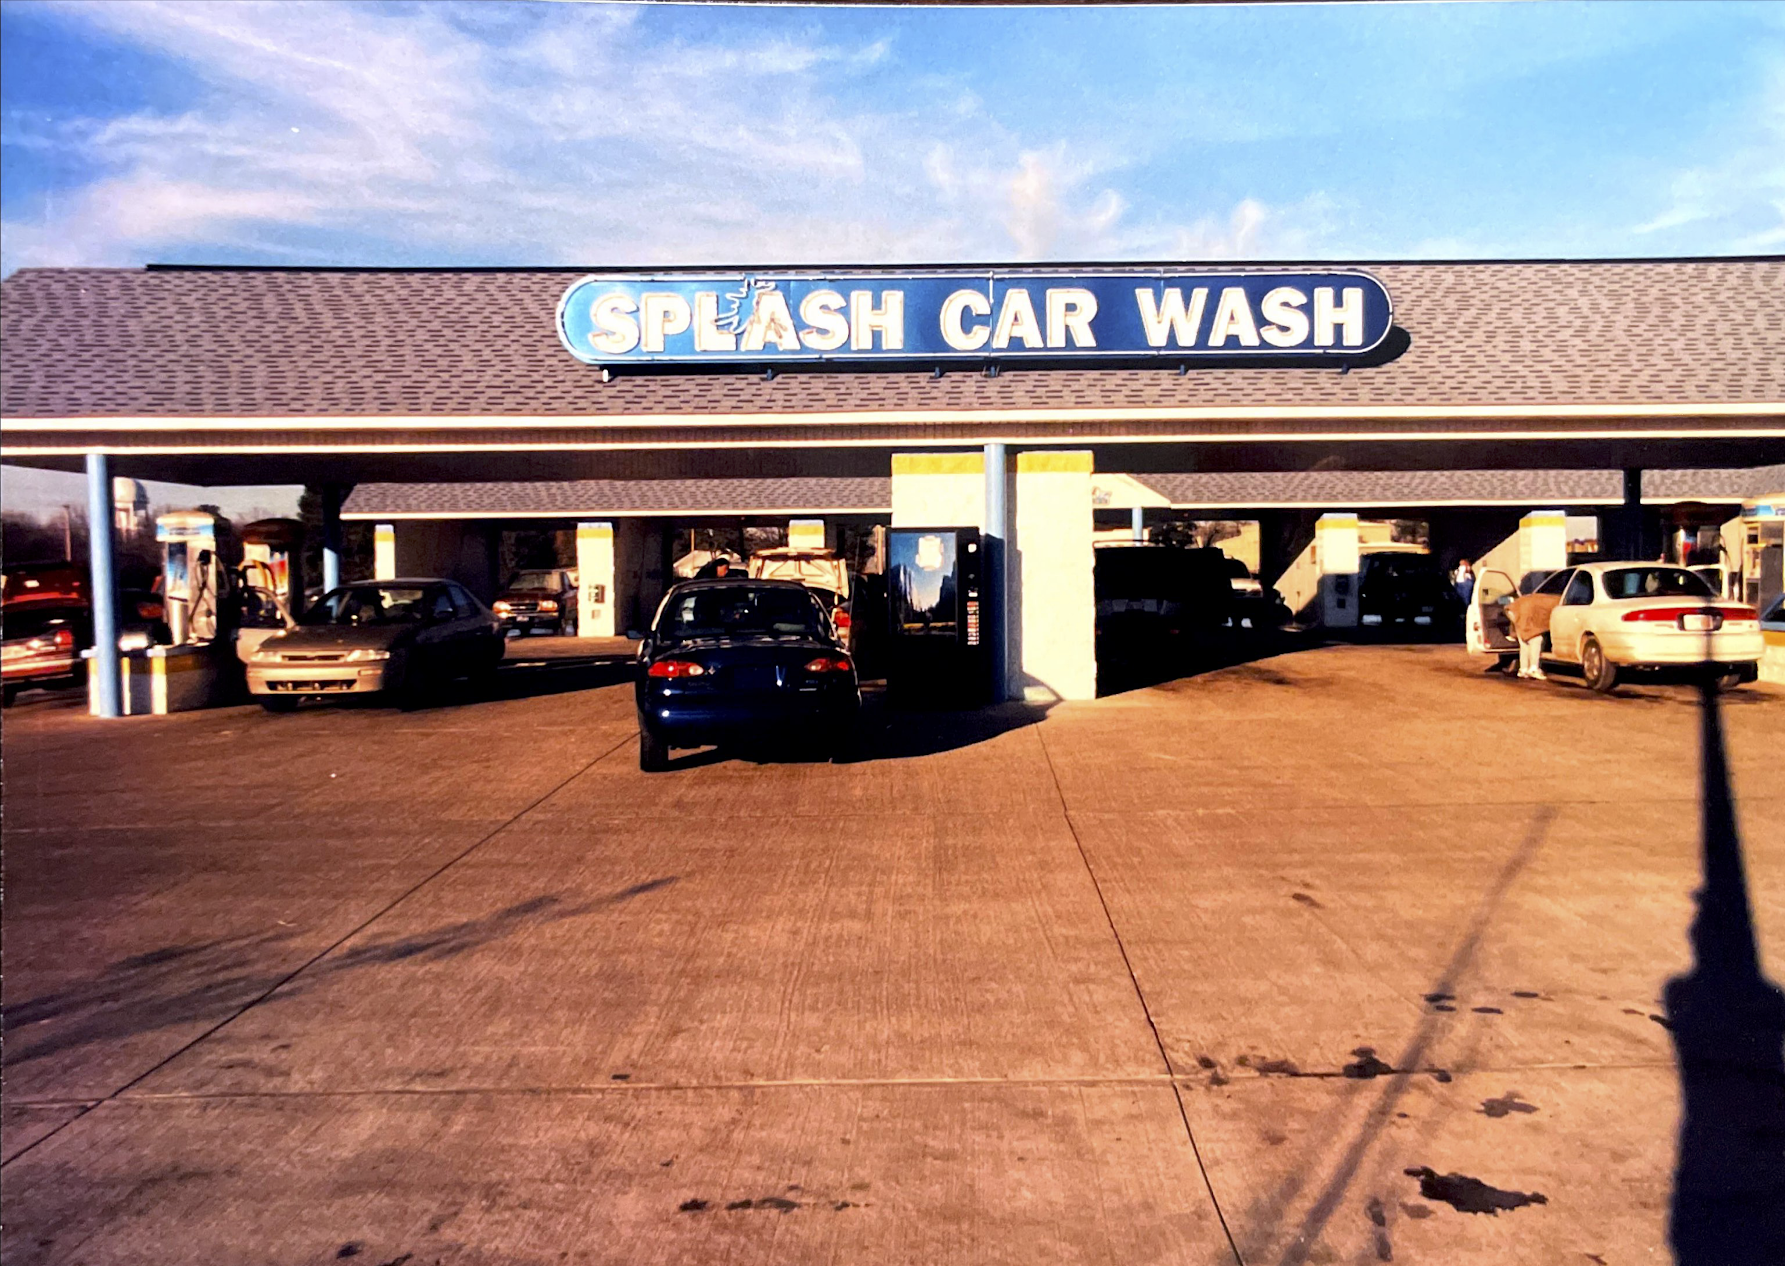 Self-serve Splash Car Wash with cars in stalls and at vacuuming stations.